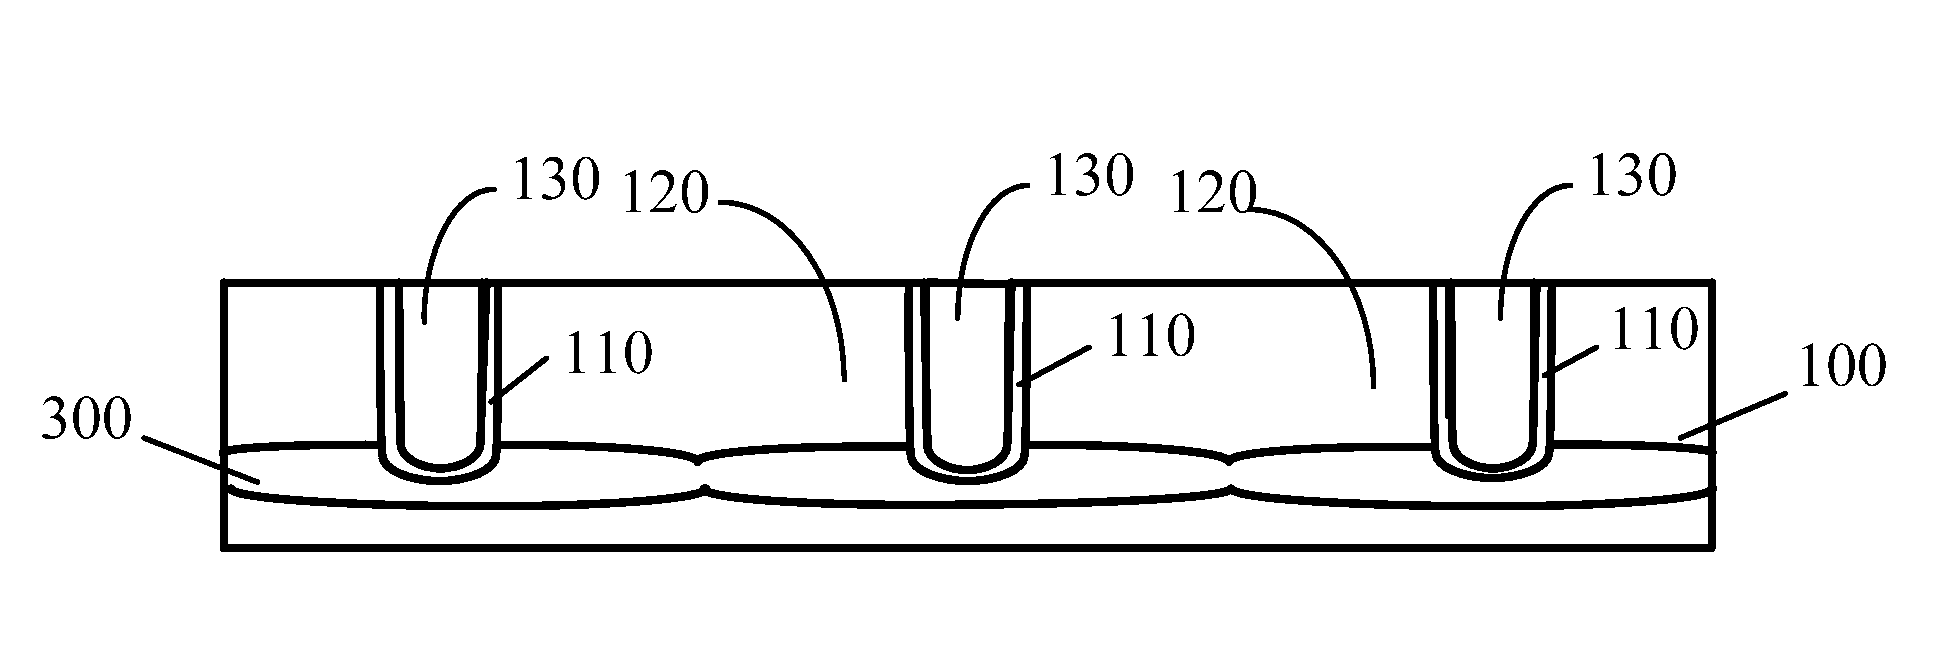 Semiconductor device having buried layer and method for forming the same